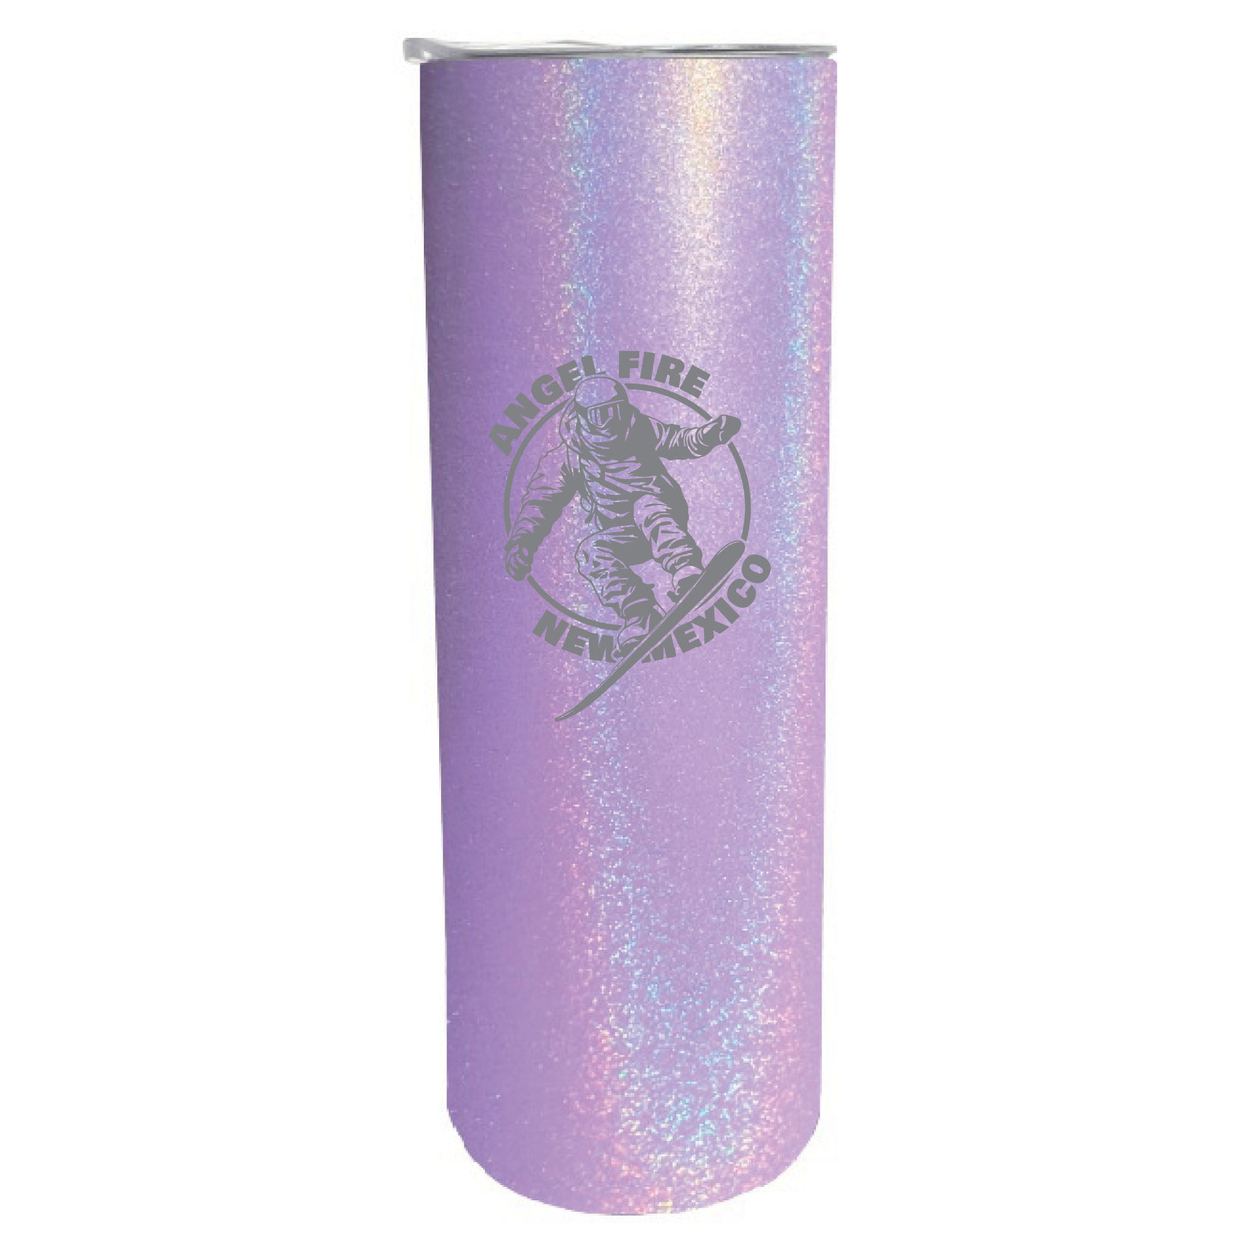 Angel Fire New Mexico Souvenir 20 Oz Engraved Insulated Stainless Steel Skinny Tumbler - Seafoam,,4-Pack